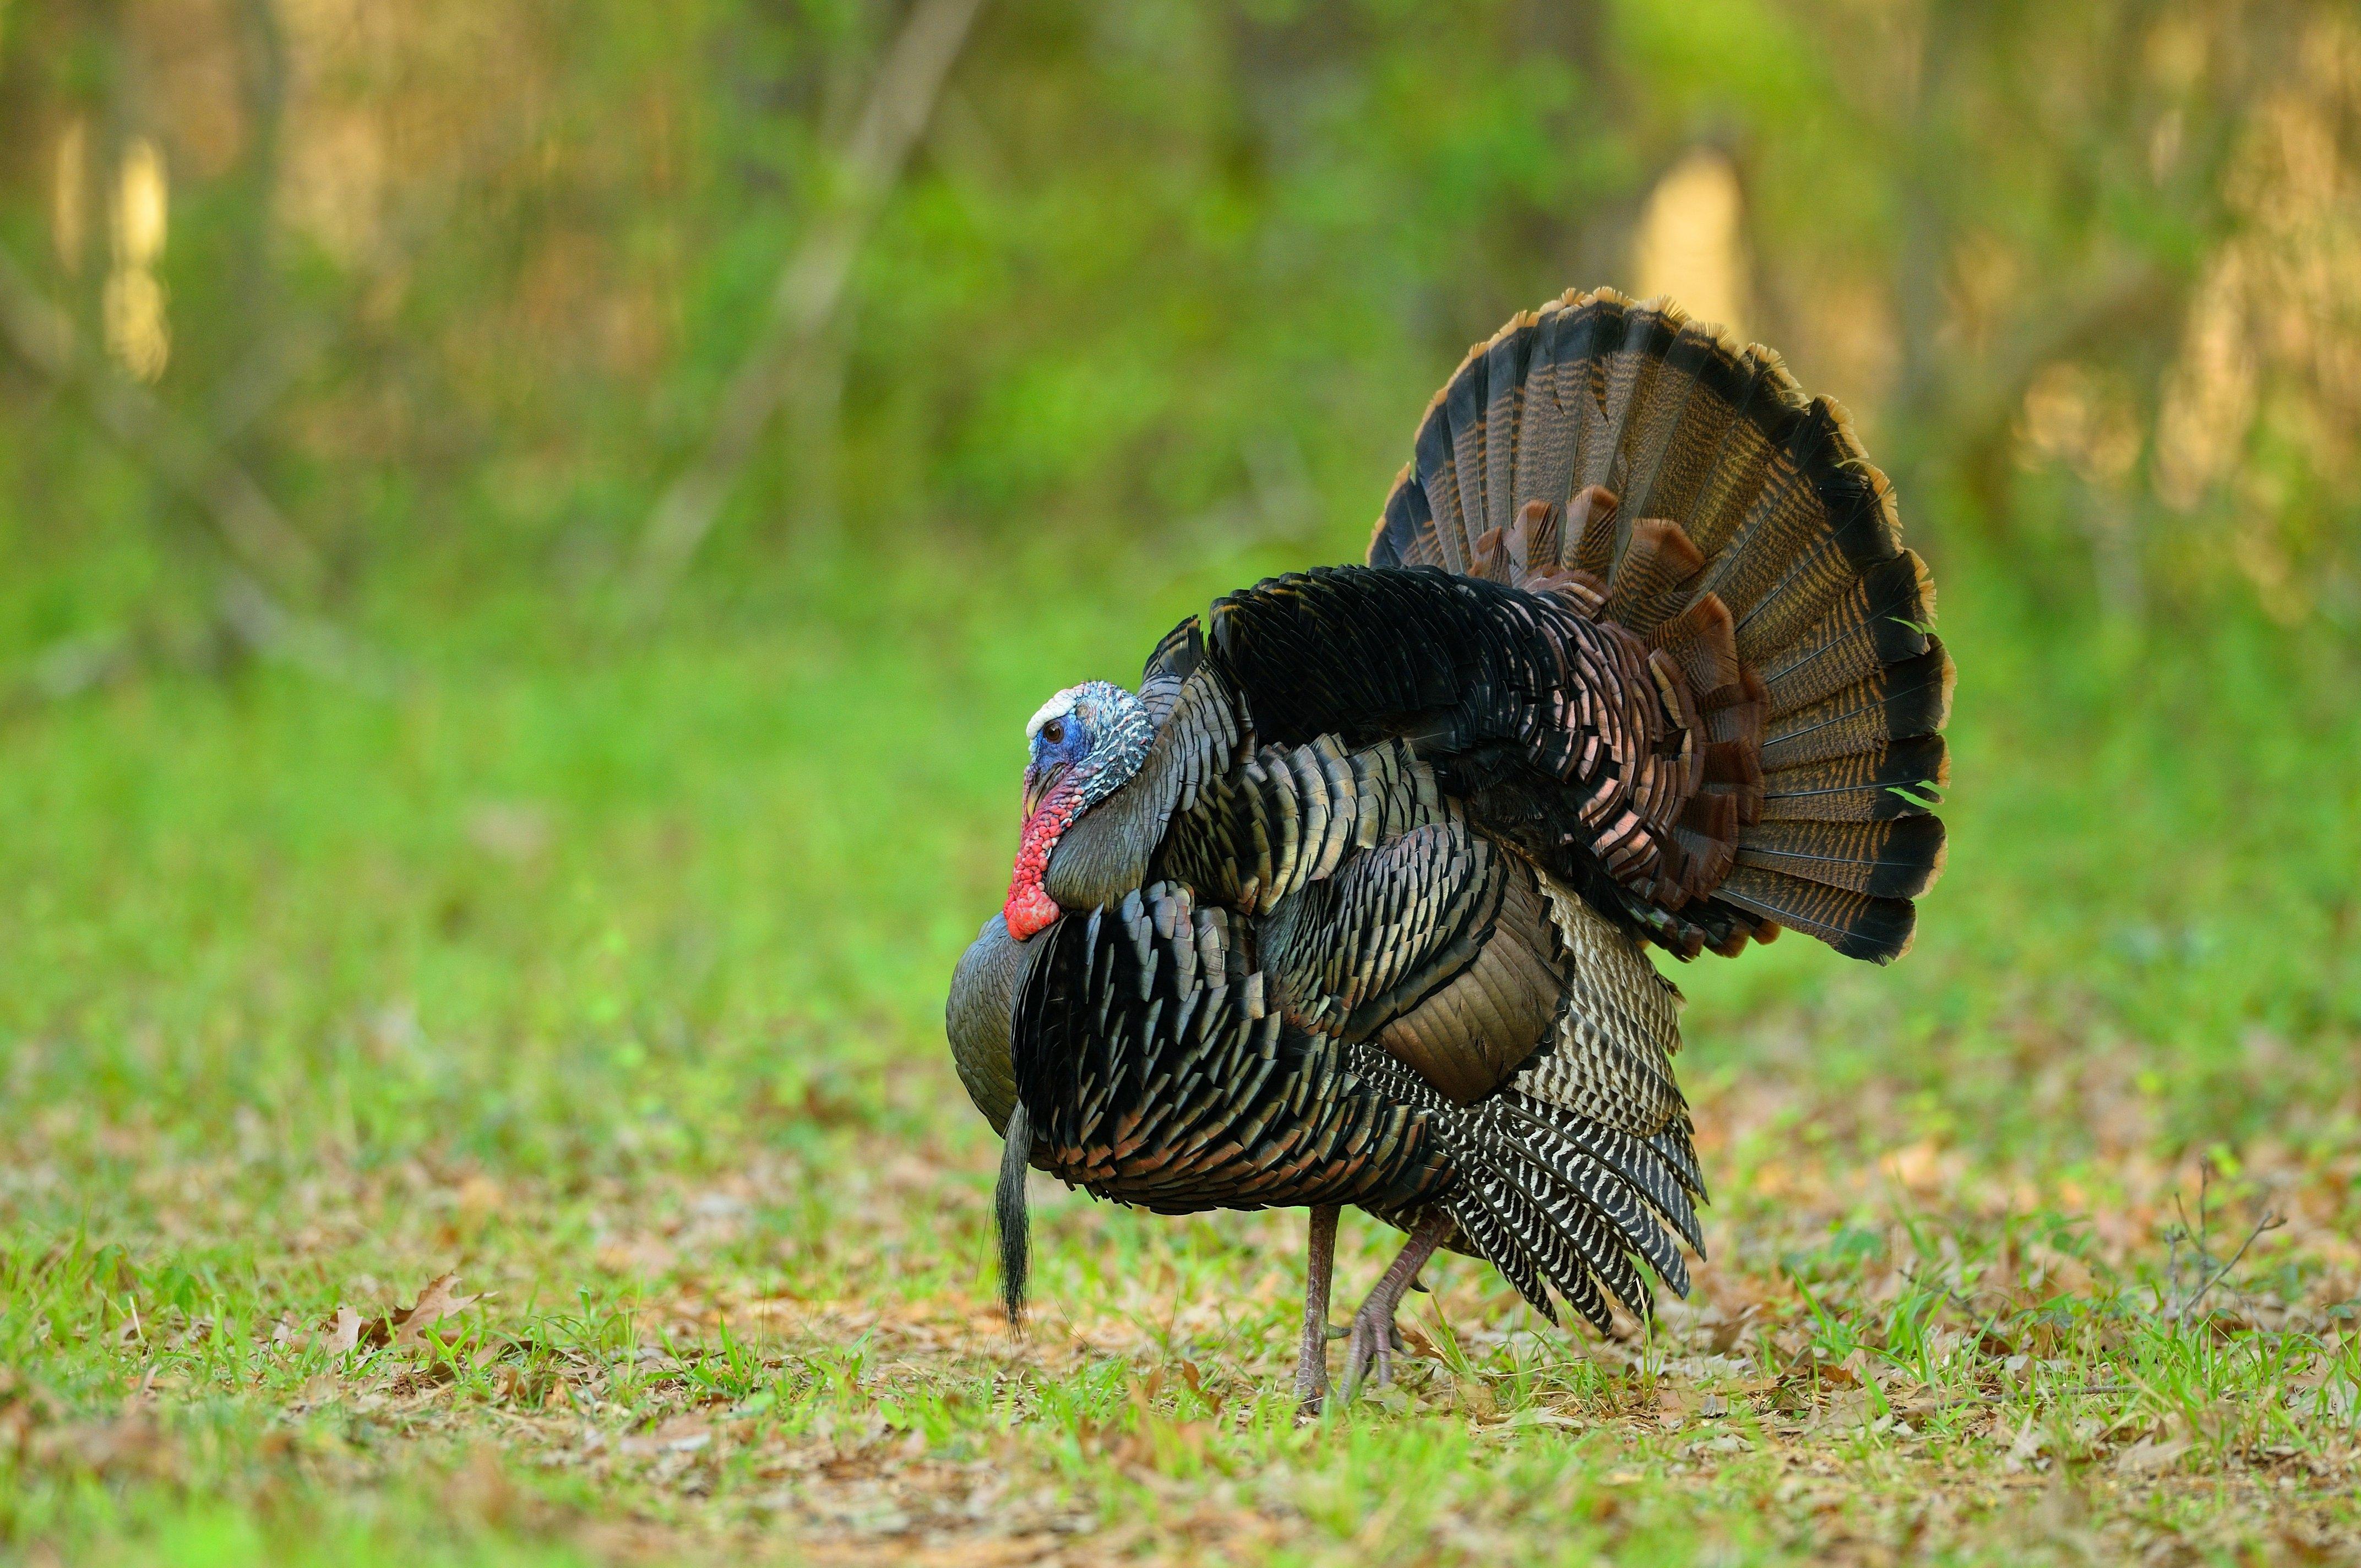 Turkey Hunting in Massachusetts. Image by Tes Randle Jolly